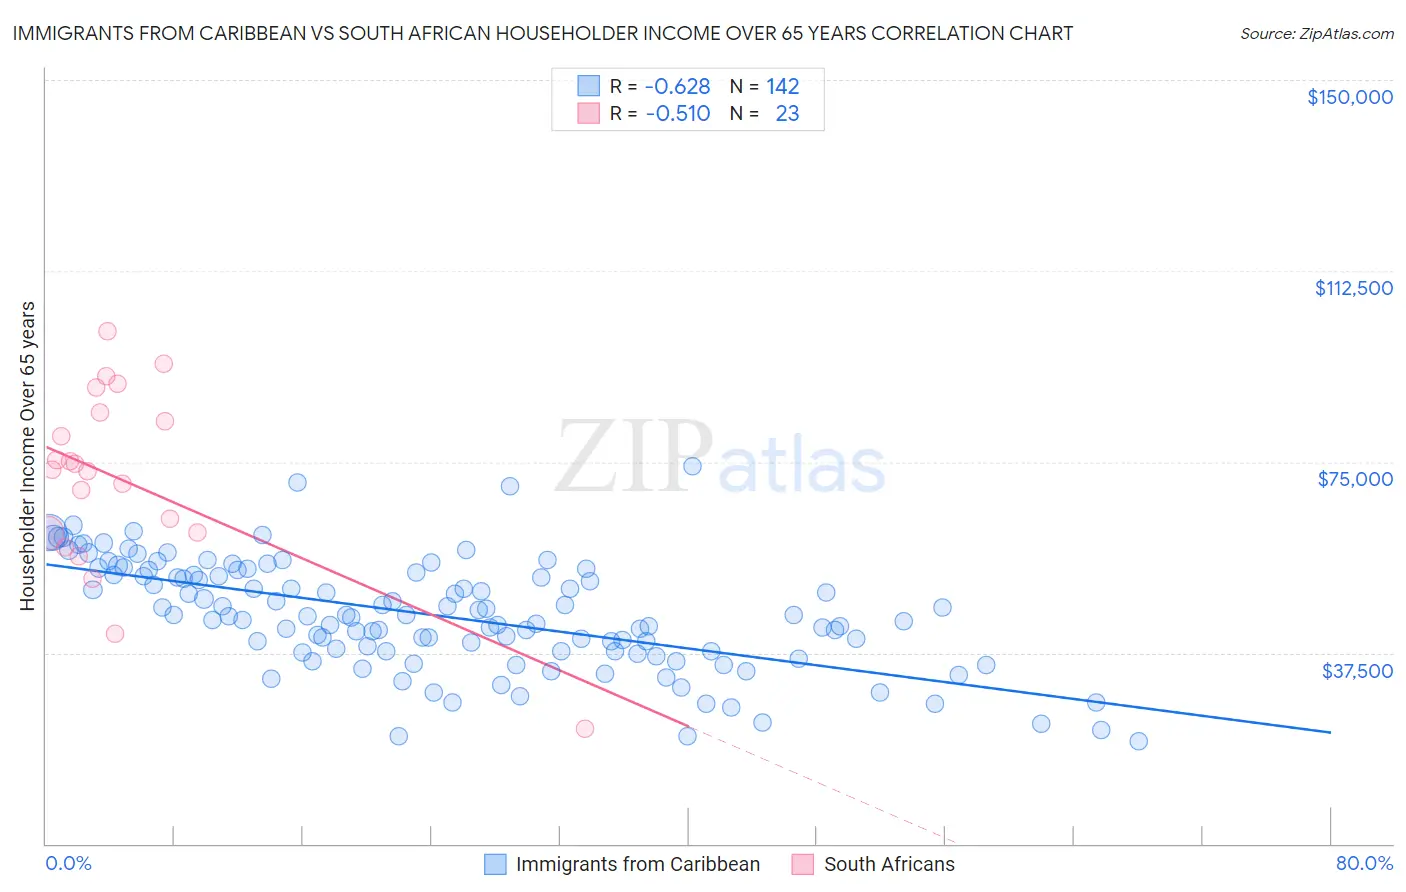 Immigrants from Caribbean vs South African Householder Income Over 65 years